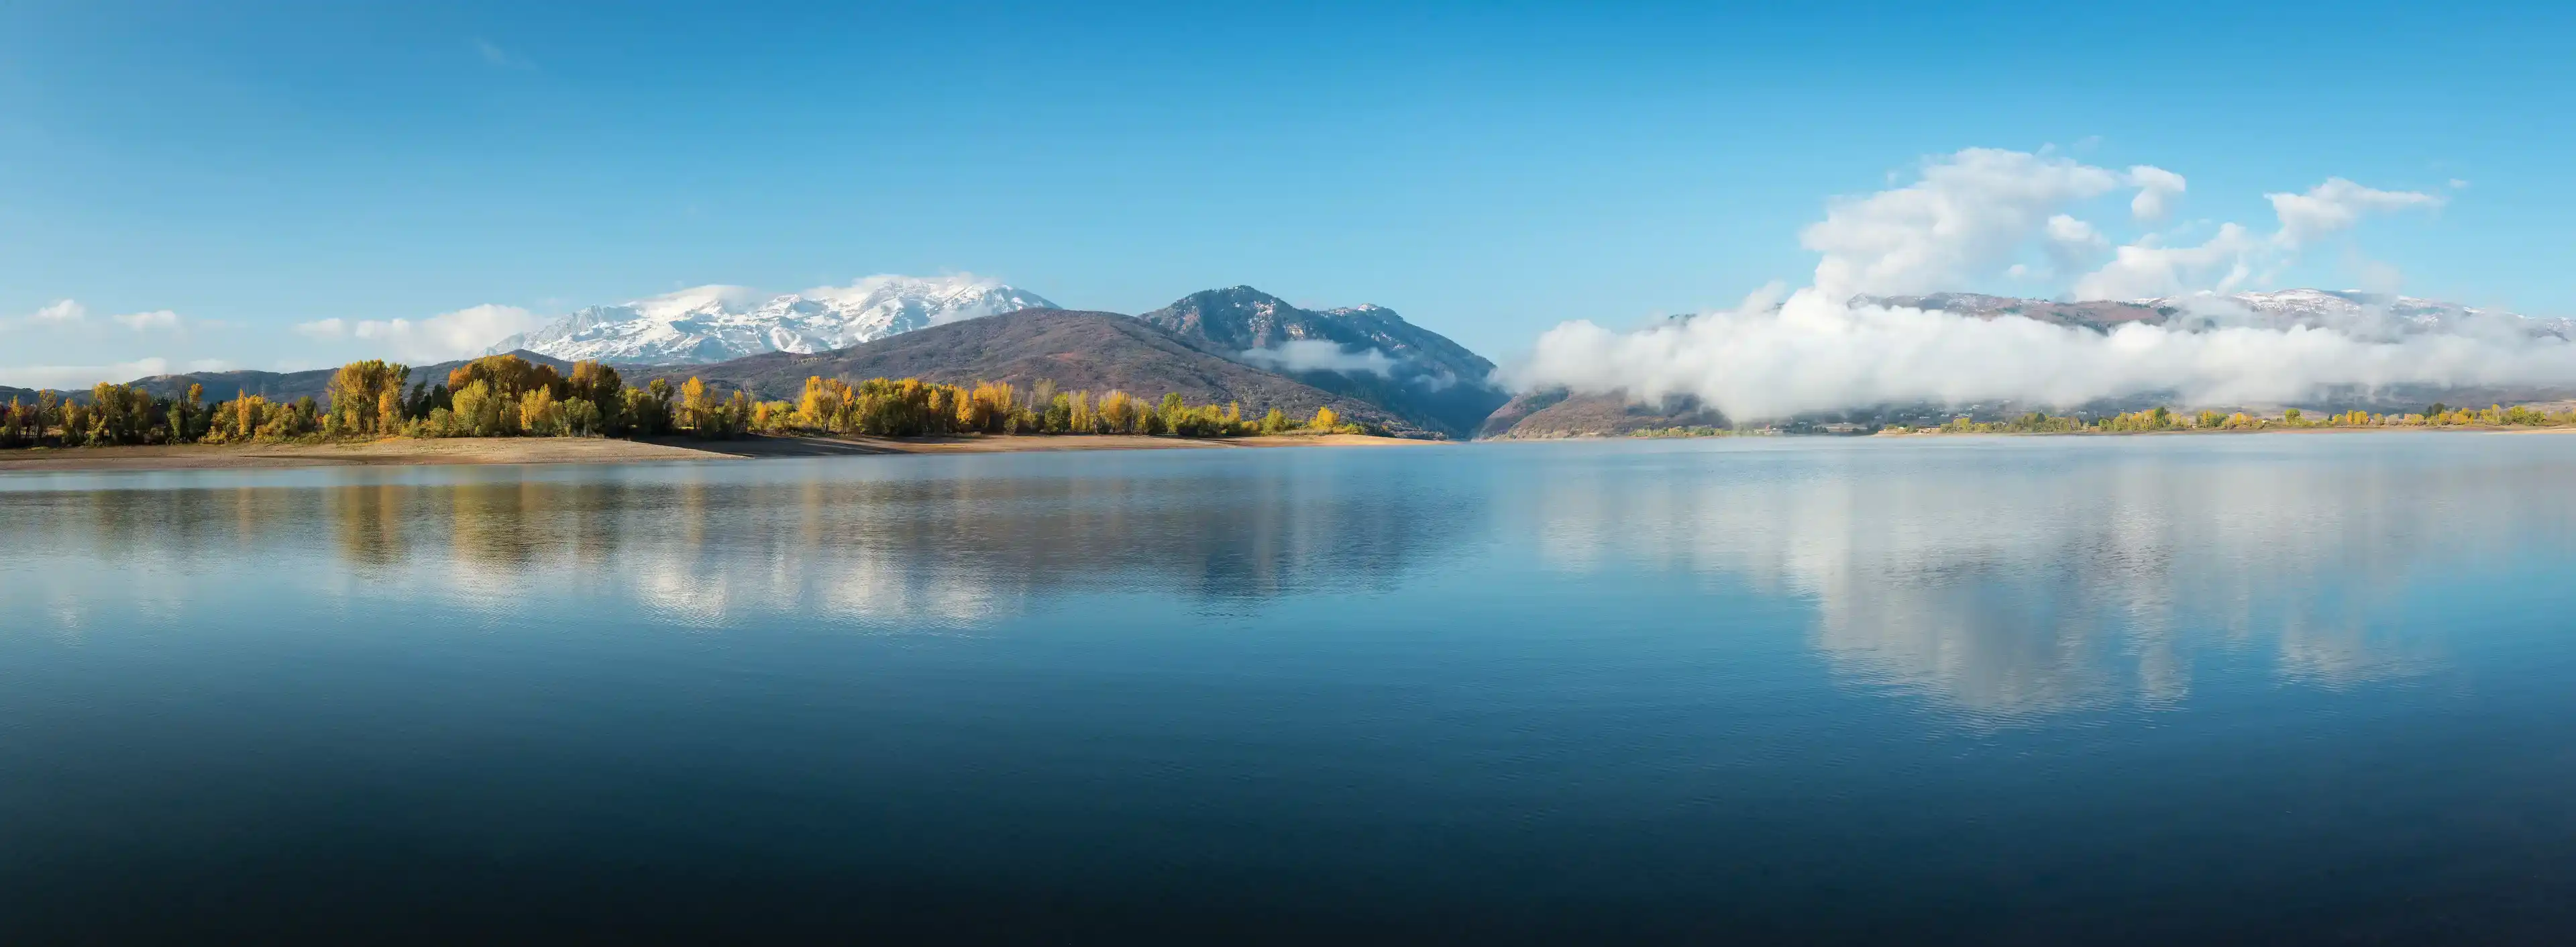 Pineview Reservoir in fall set against a snow capped Snowbasin Resort and mountainscape.